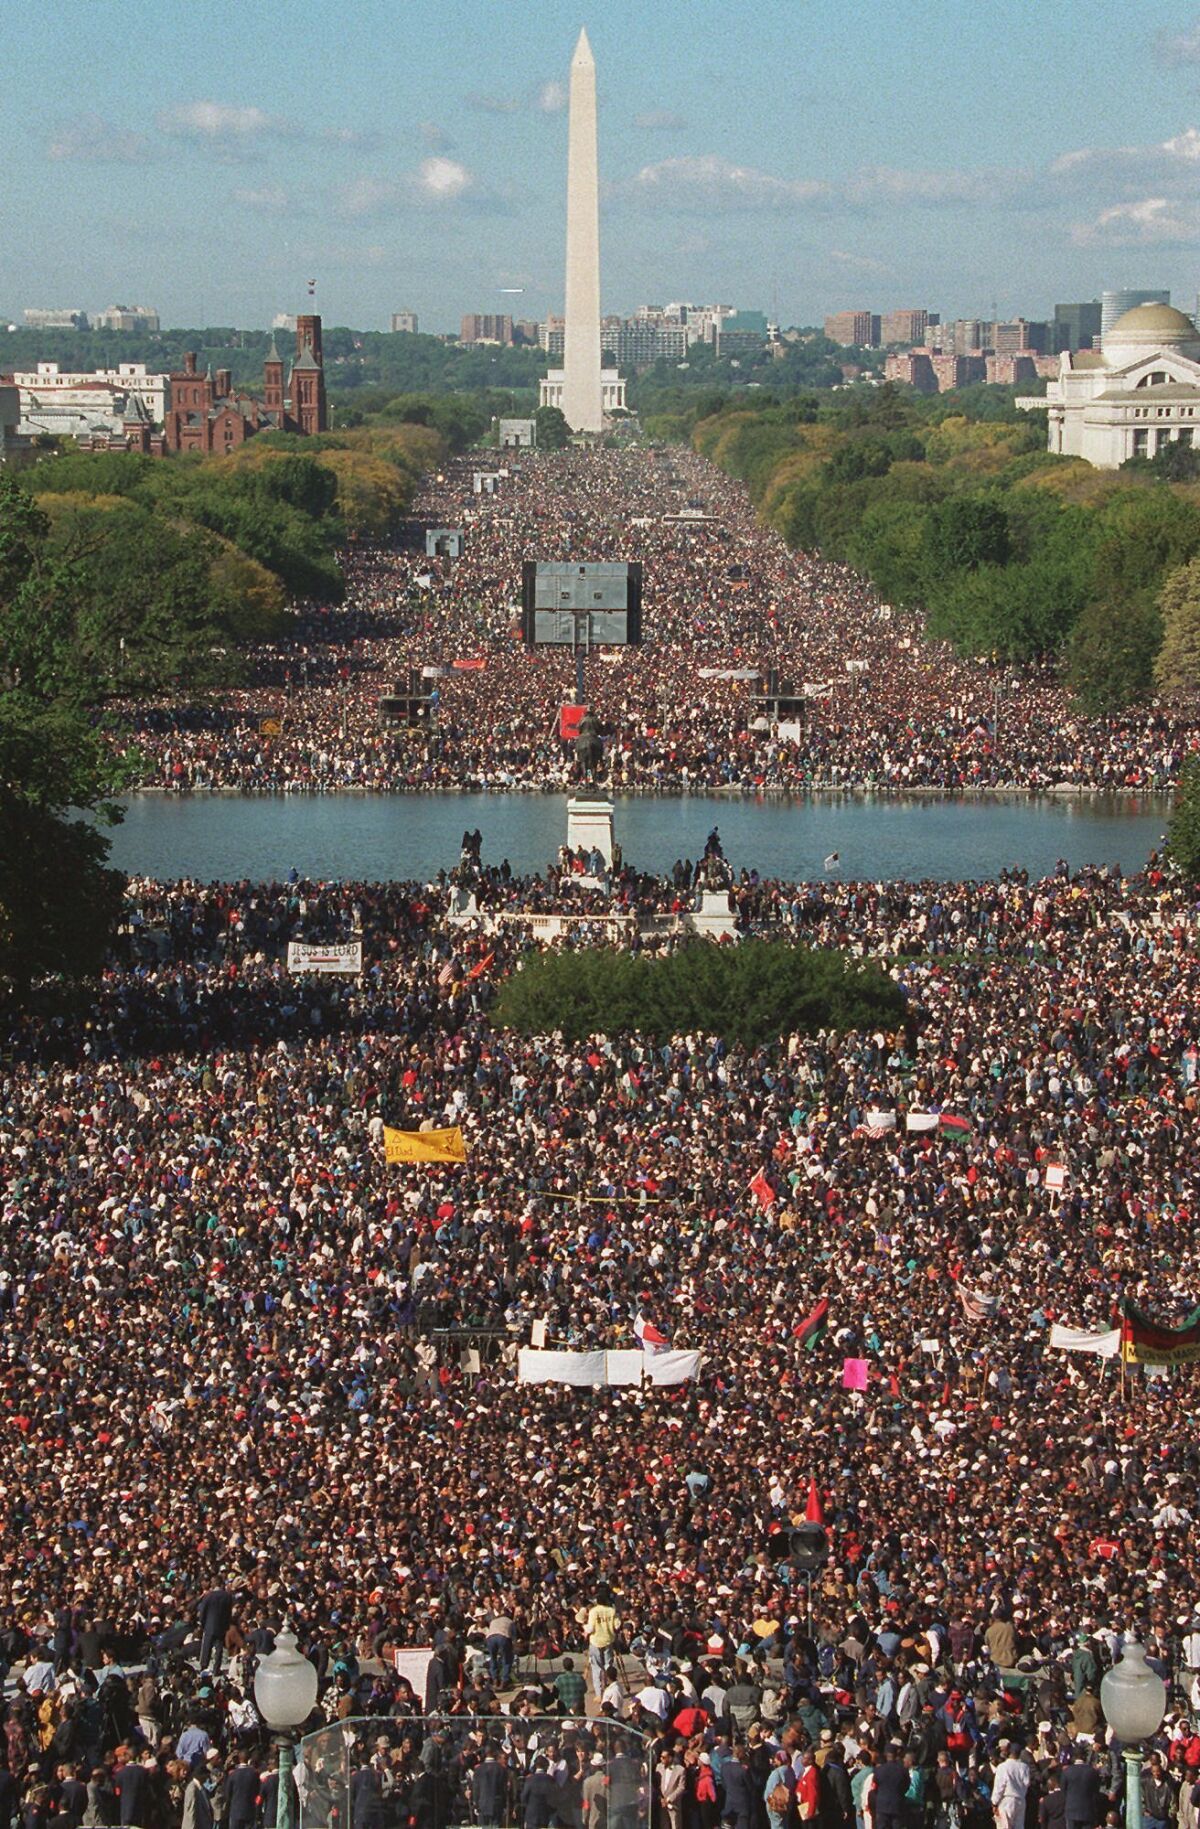 Participants in the Million Man March gather on Capitol Hill and the Mall in Washington on Oct. 16, 1995.